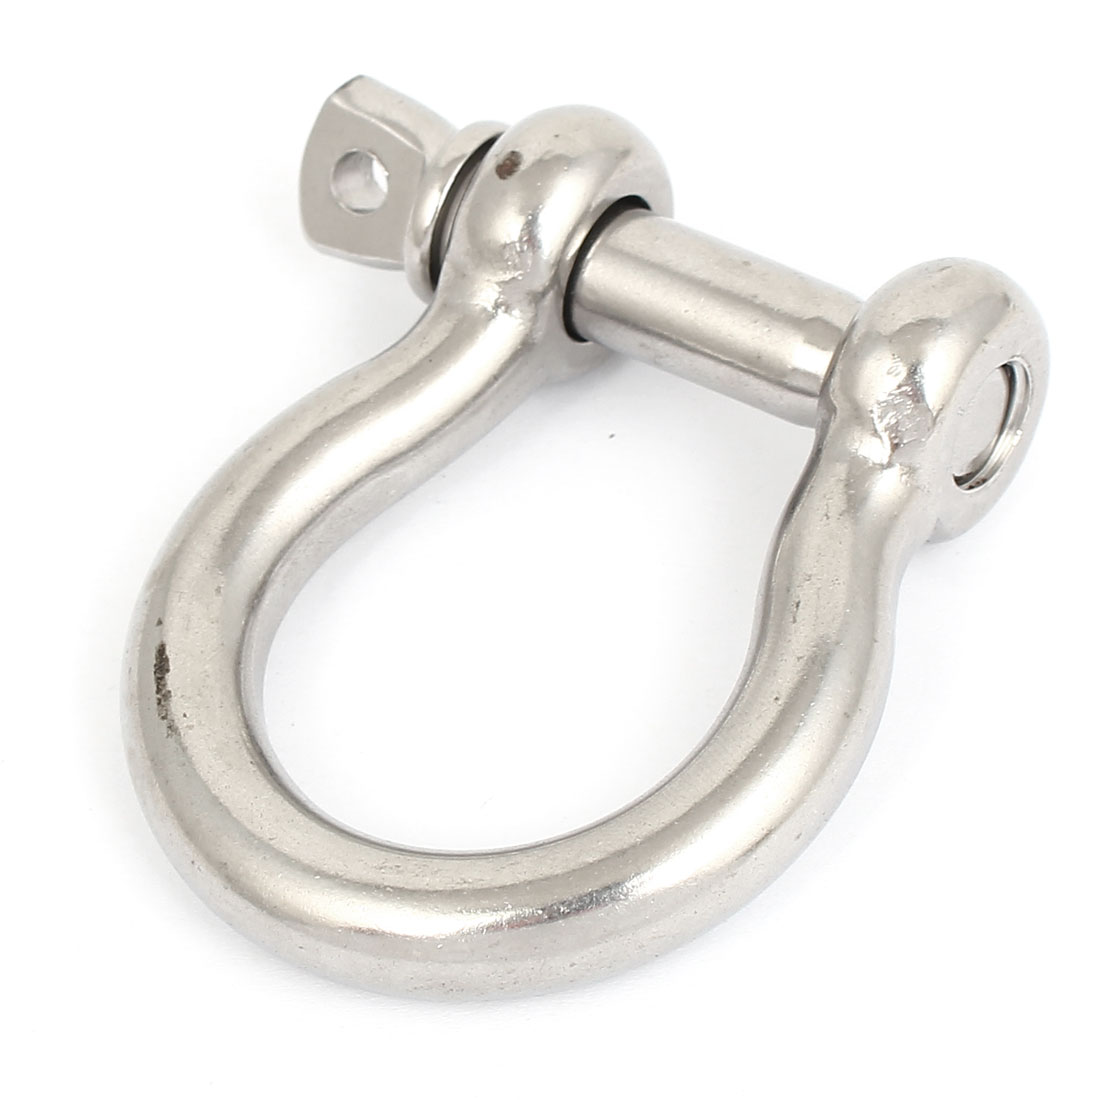 uxcell M12 Stainless Steel U-Shape Bow Shackles Wire Rope Fastener Silver Tone